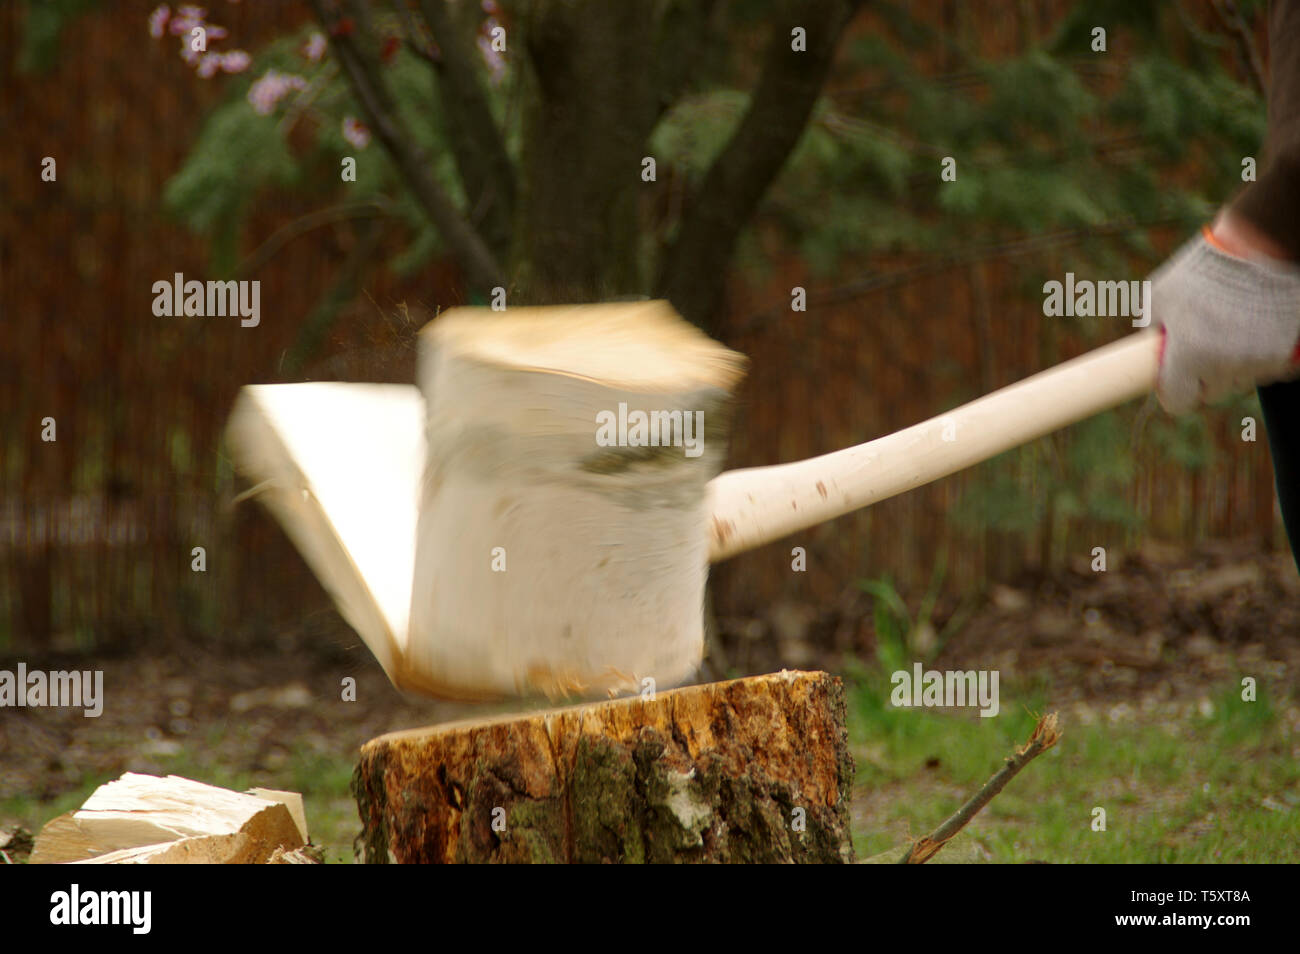 Chopping wood with an ax in his hand. Firewood is getting ready for winter. Dynamic view. The farm is self-sufficient. Stock Photo